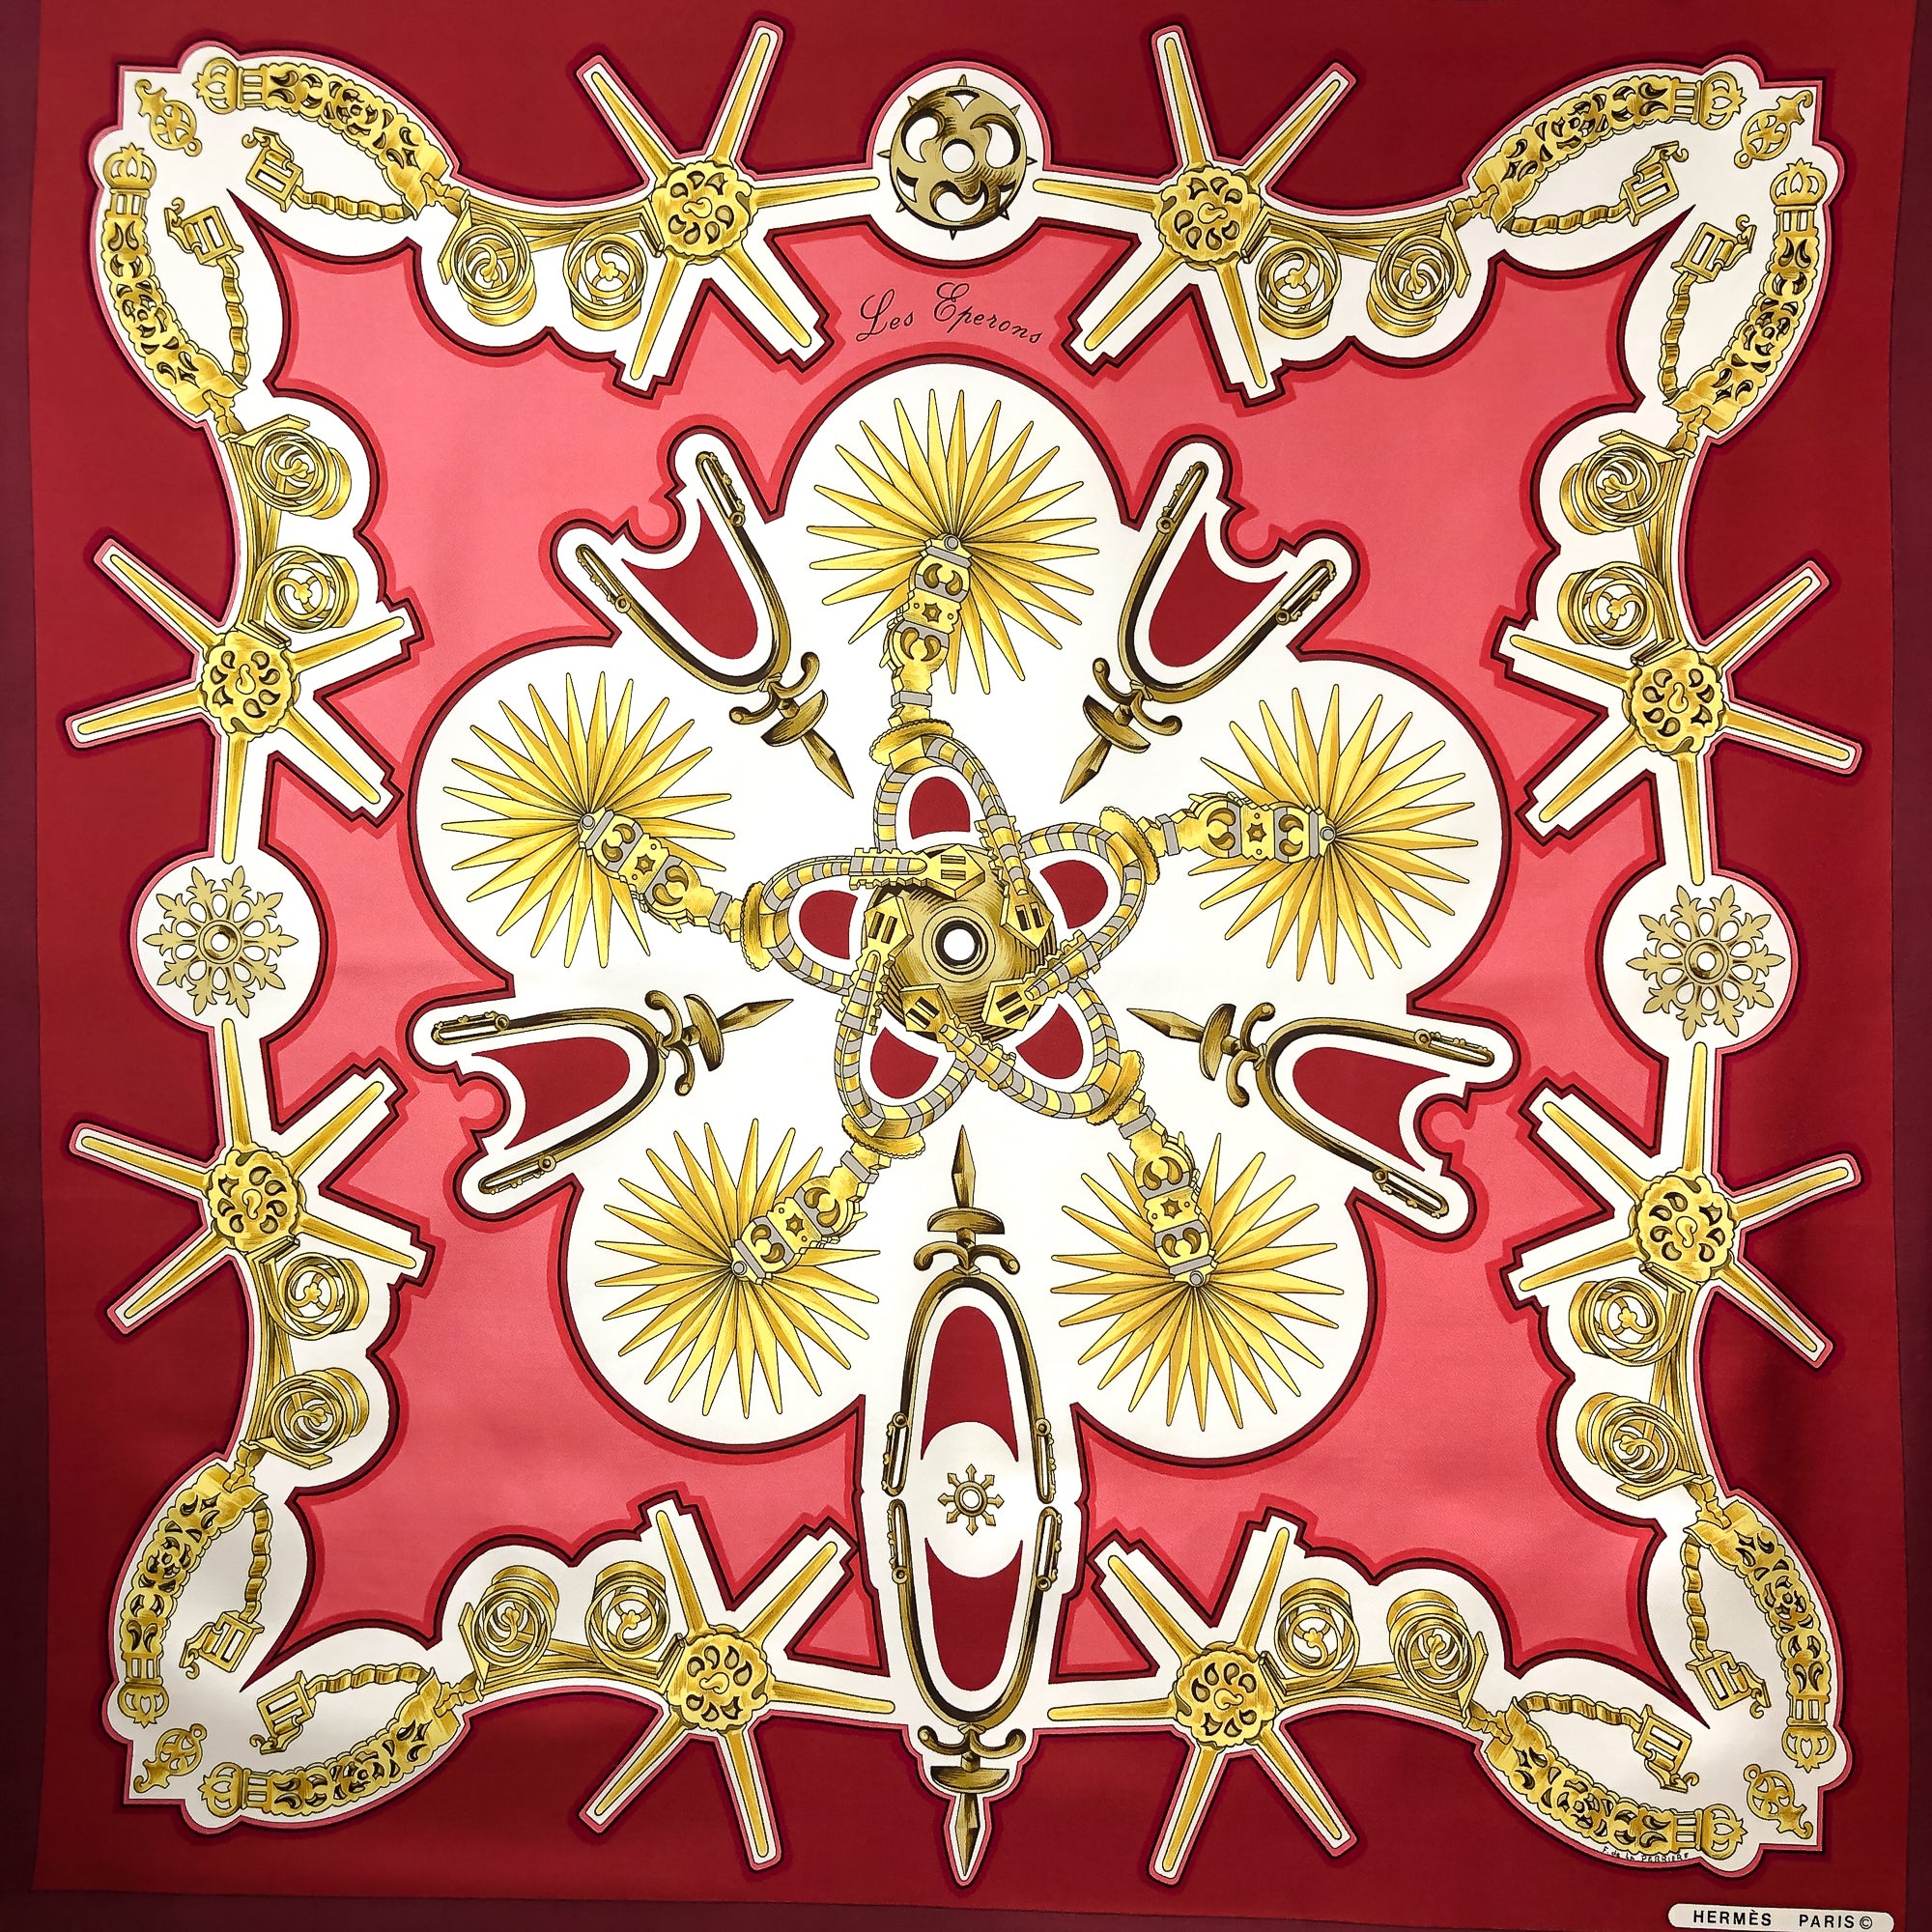 Les Eperons Hermes Scarf by Francoise de la Perriere 90 cm Silk Twill ...